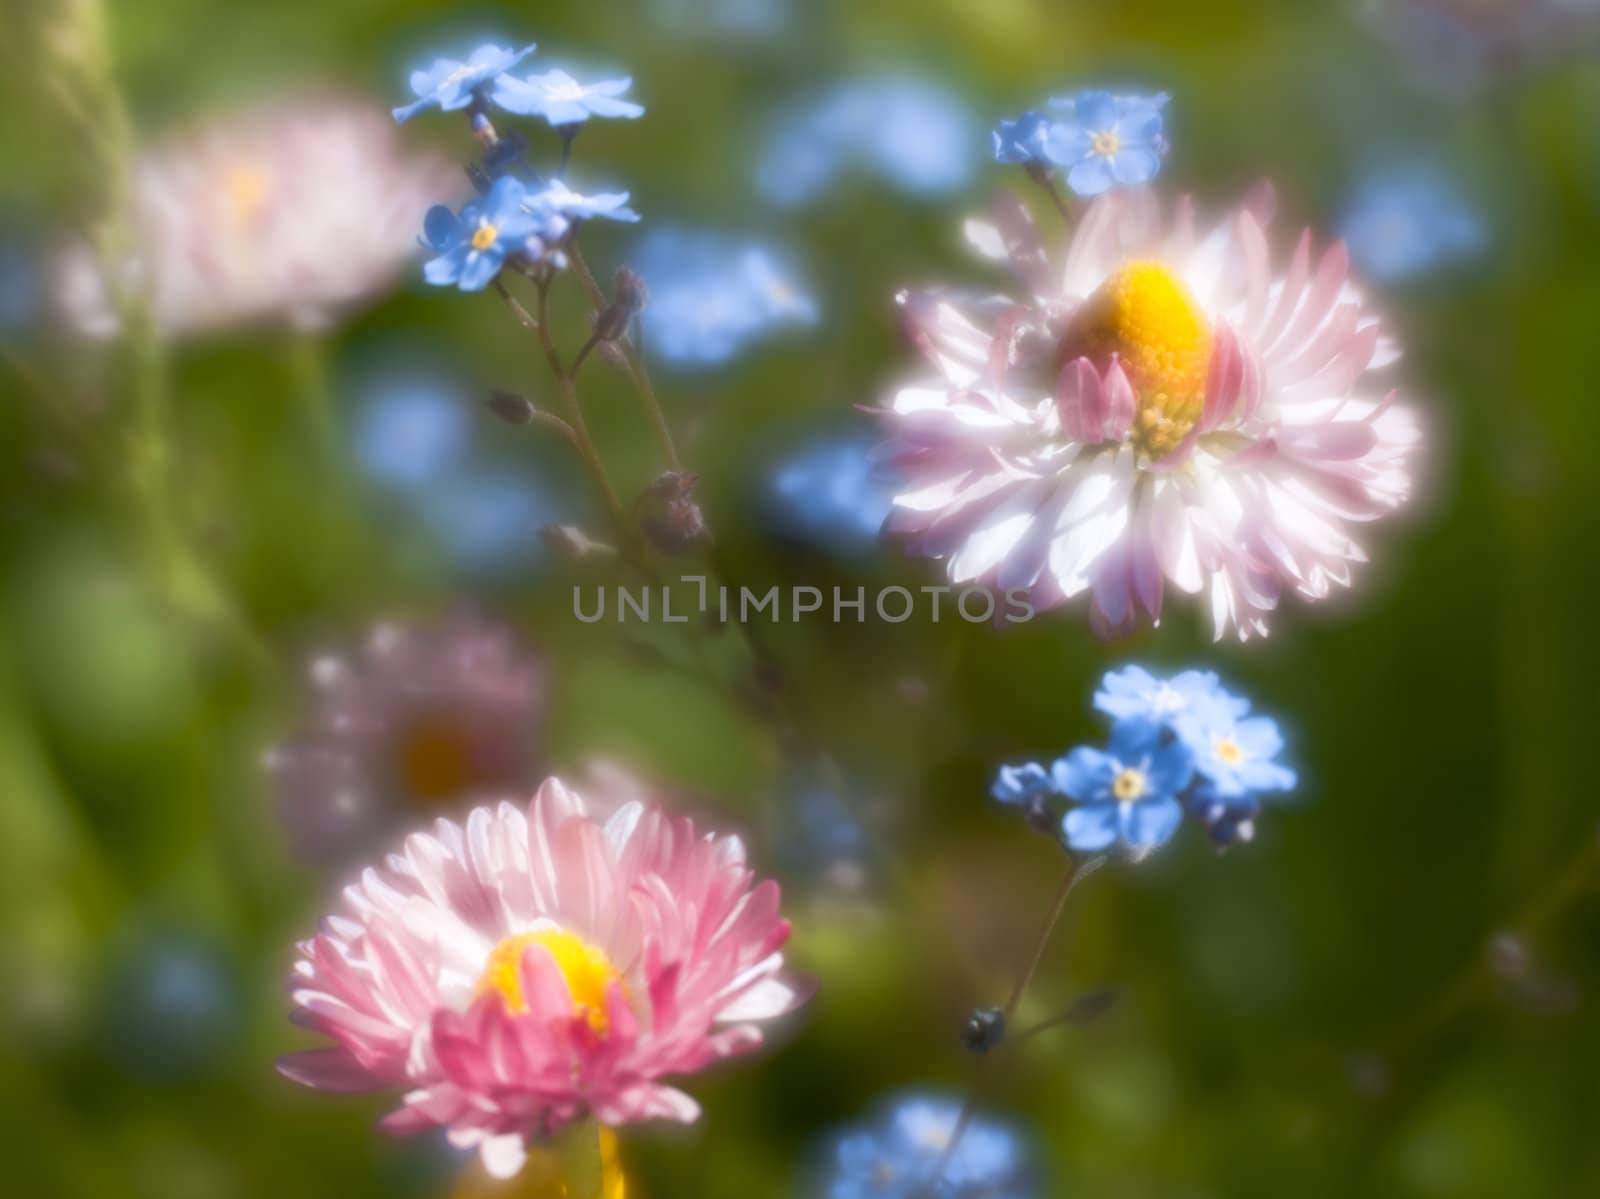 Daisy and forget-me-not through monocle lens